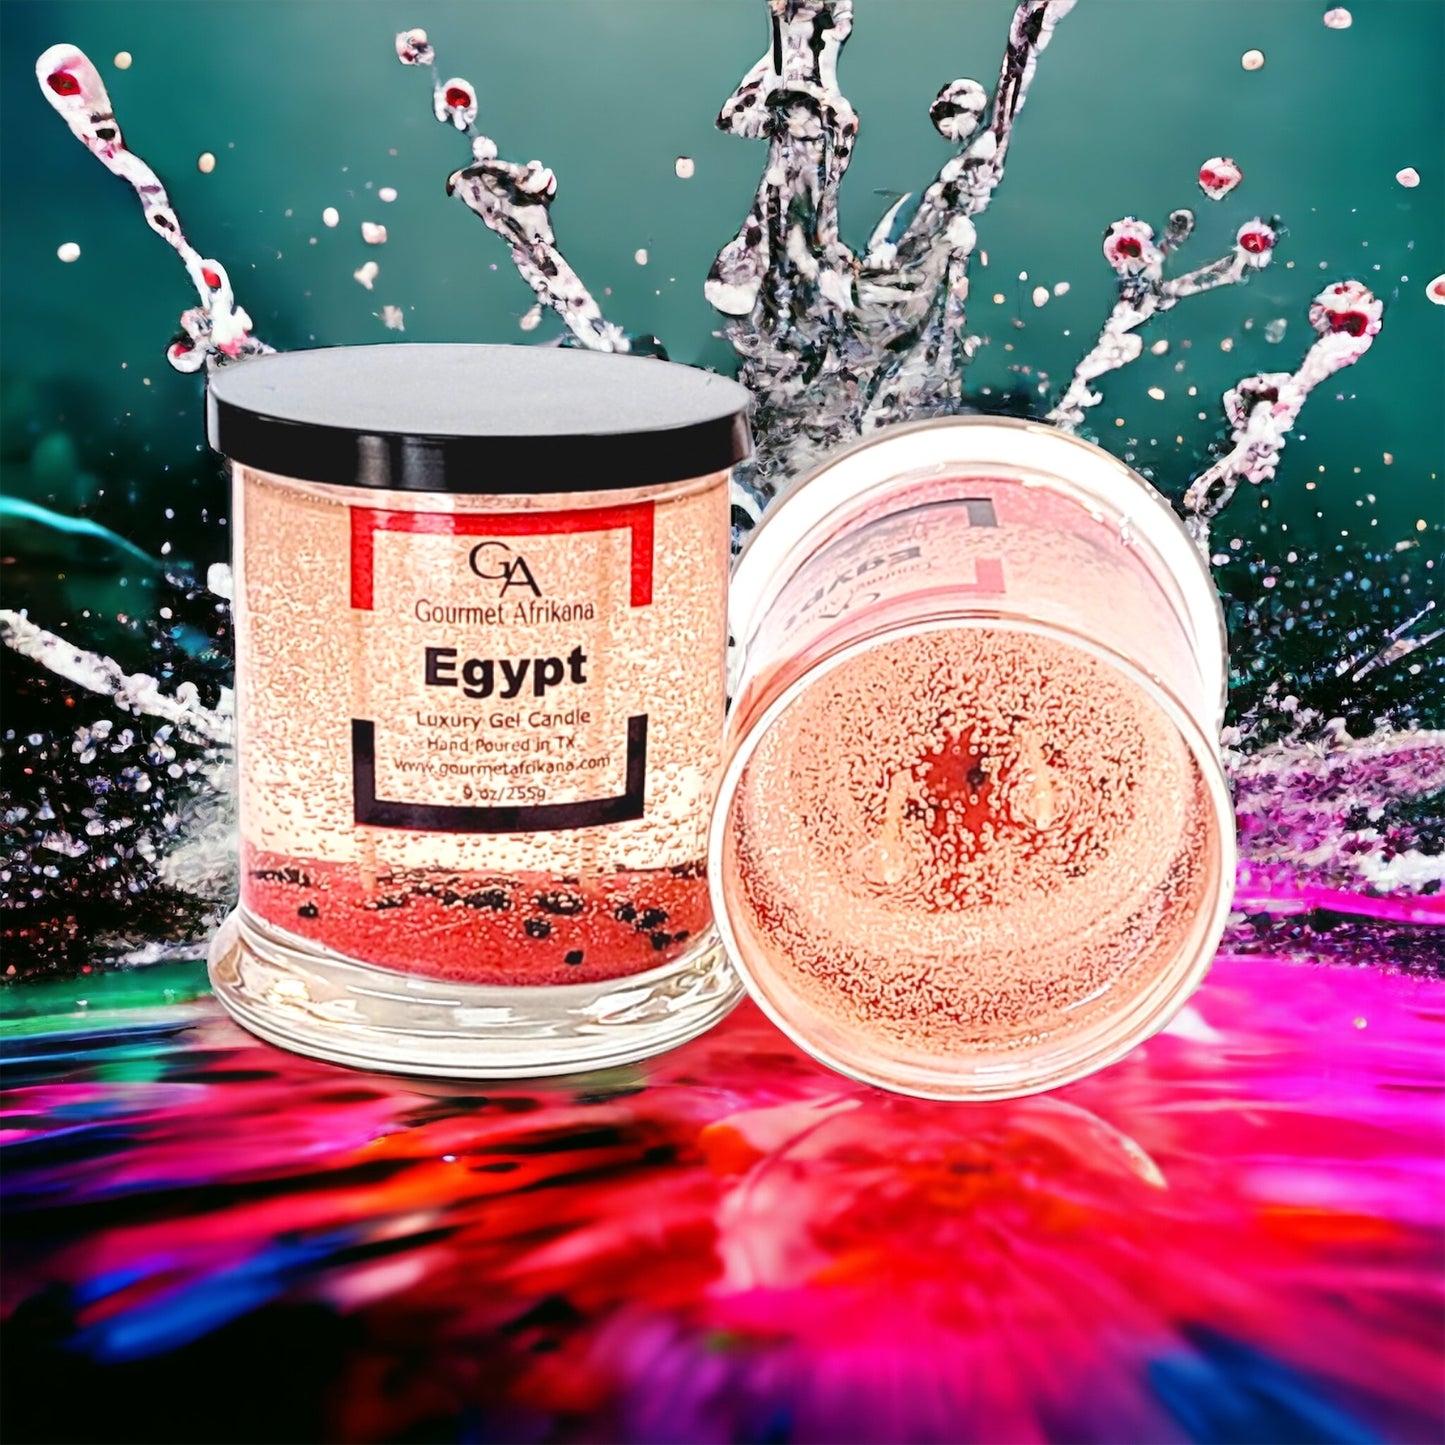 Egypt Gel Candle